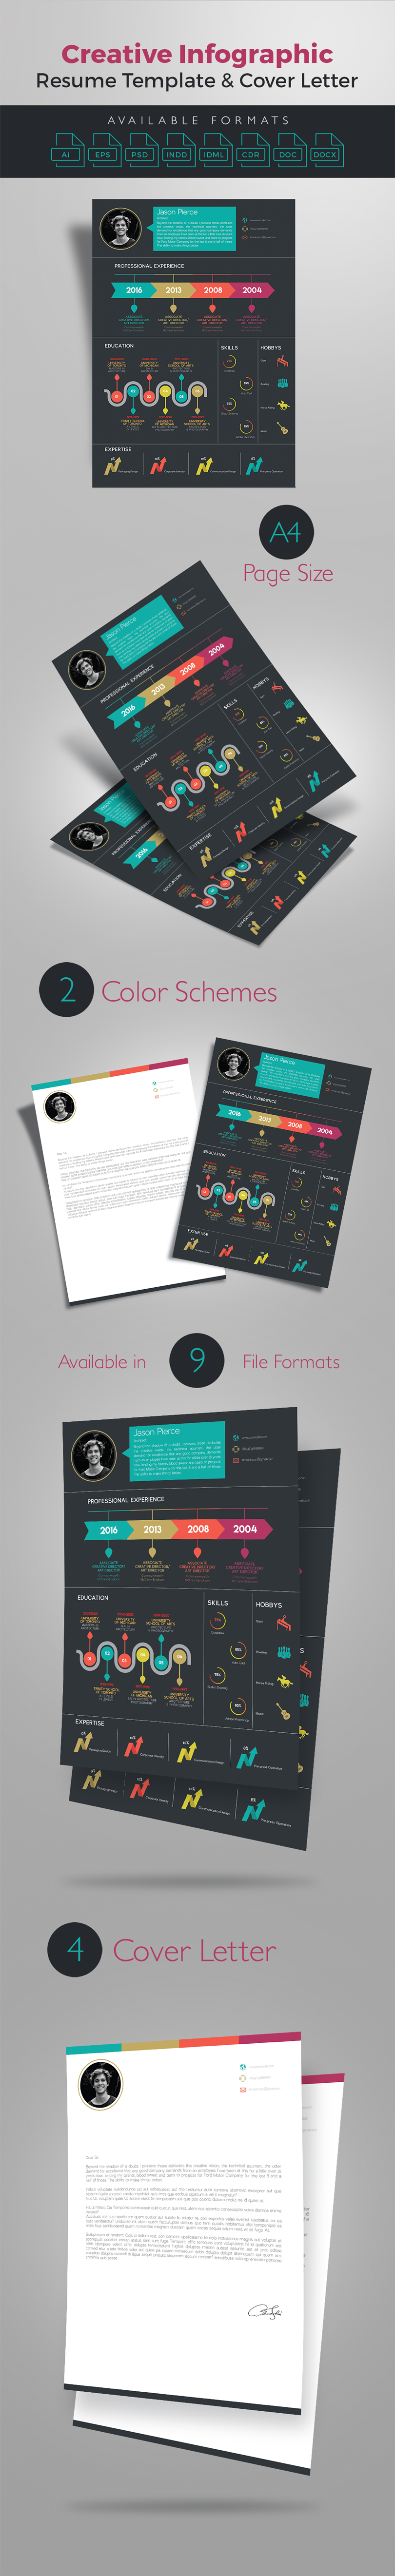 creative-infographic-resume-template-with-cover-letter